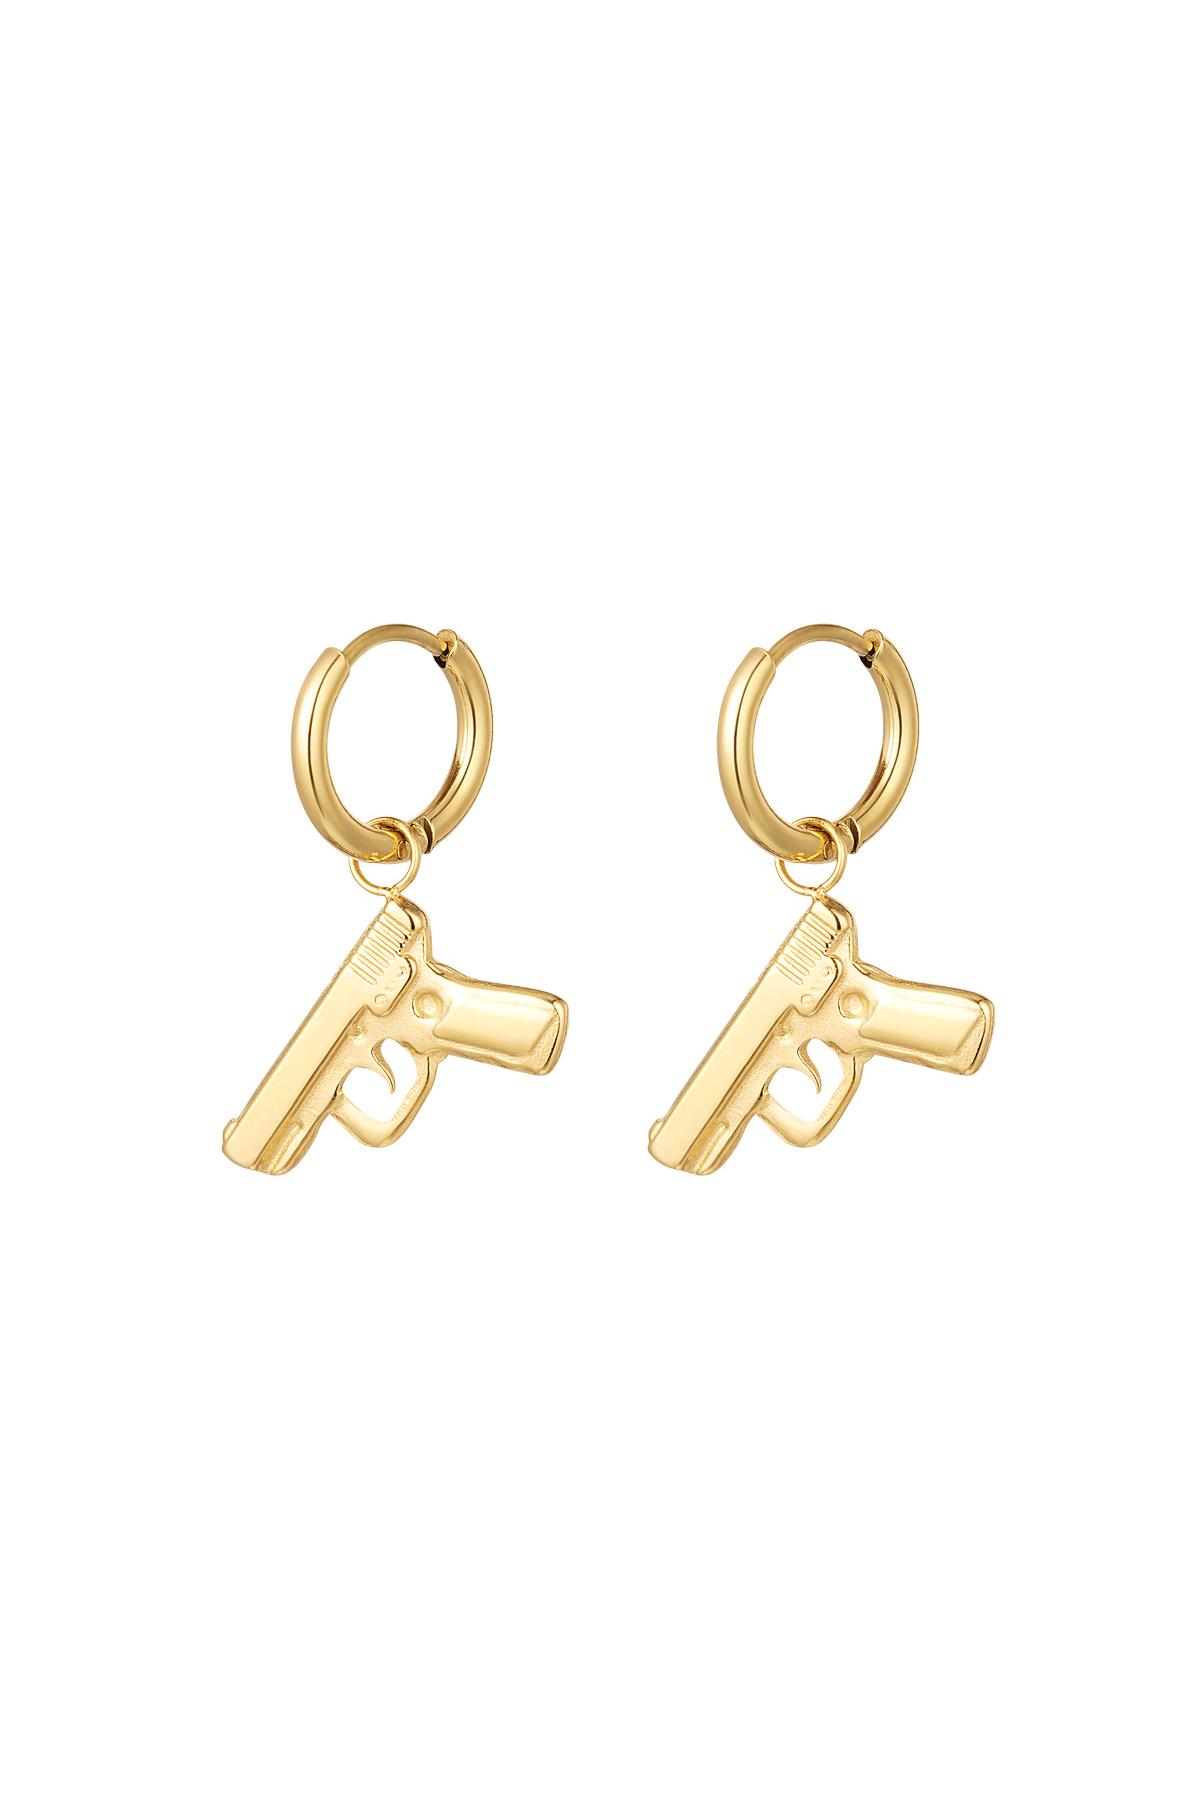 Earrings Dress to Kill Gold Stainless Steel h5 